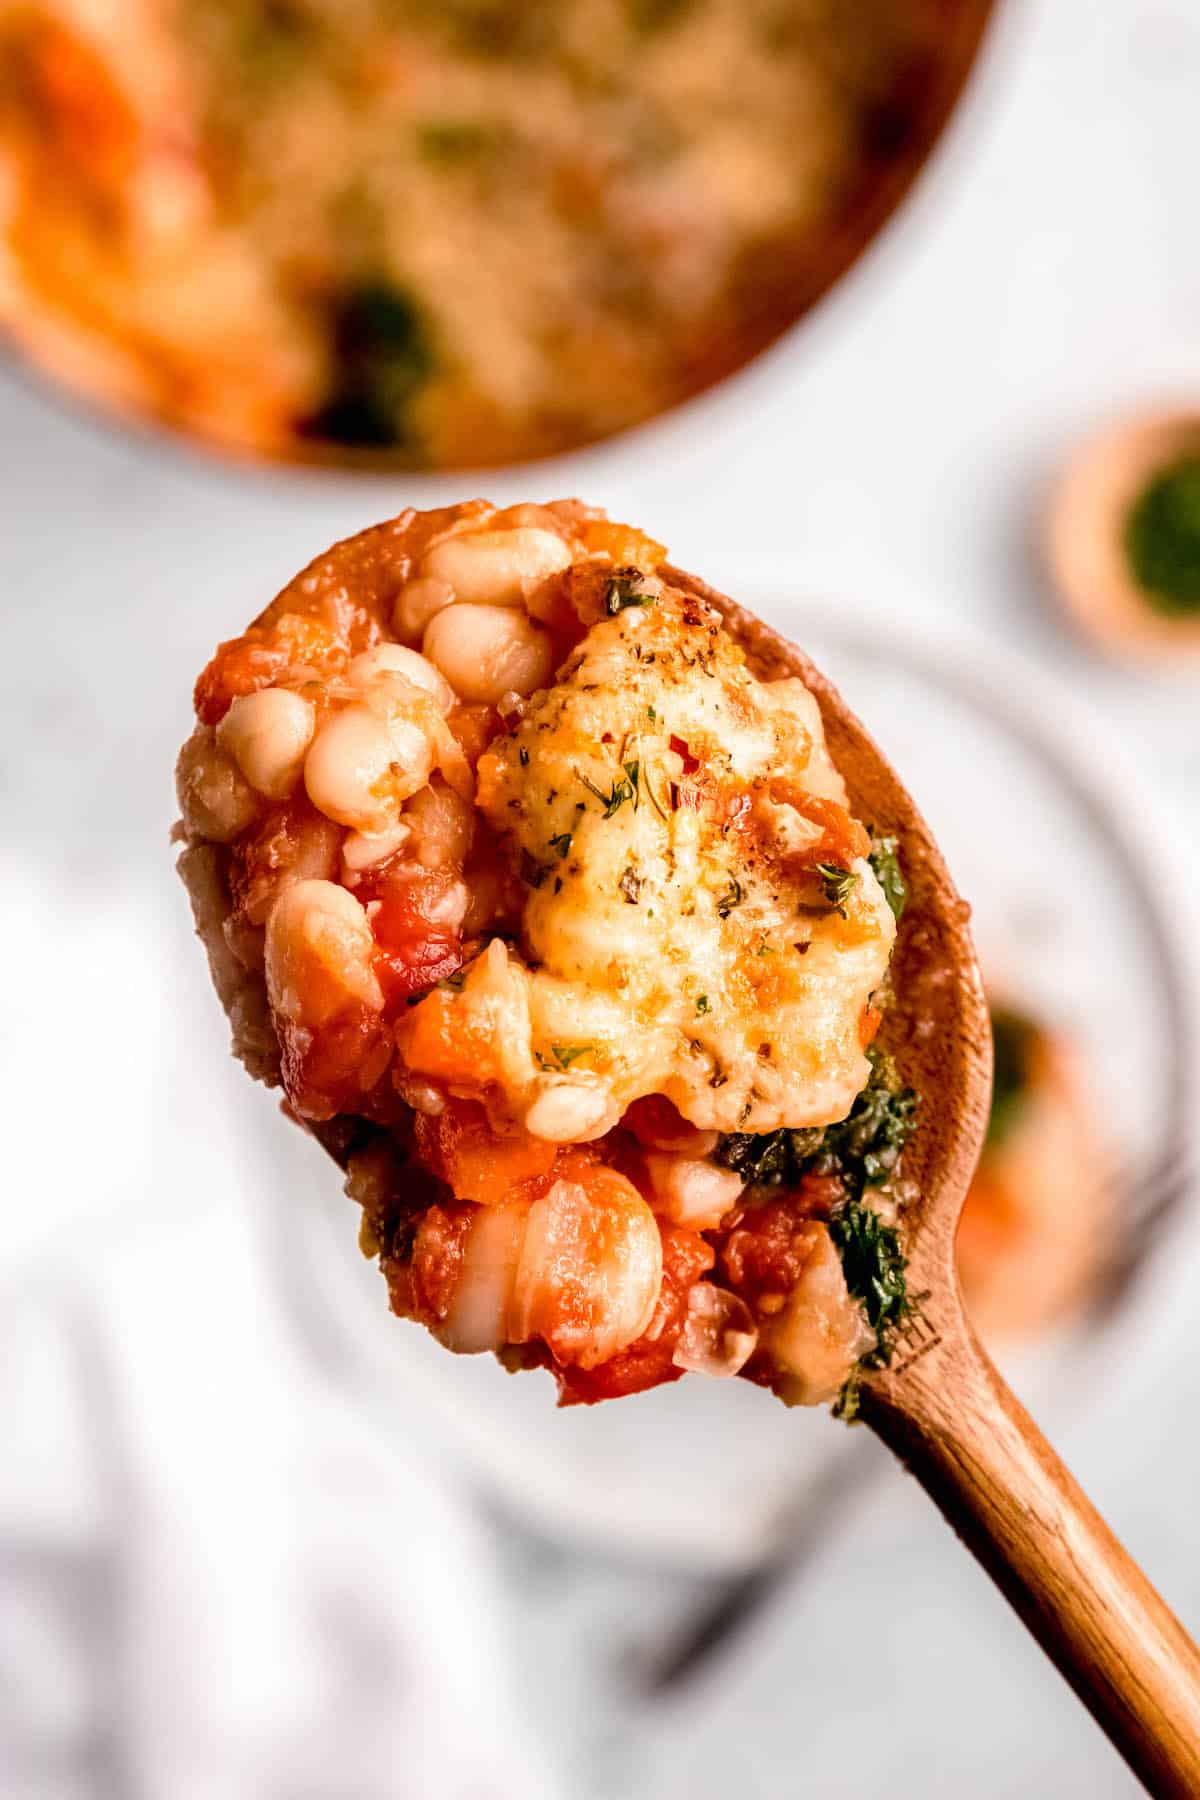 closeup shot of a wooden spoon with a scoop of the cheesy tomato bean bake showing the browned cheese, saucy tomato beans, and bright kale.